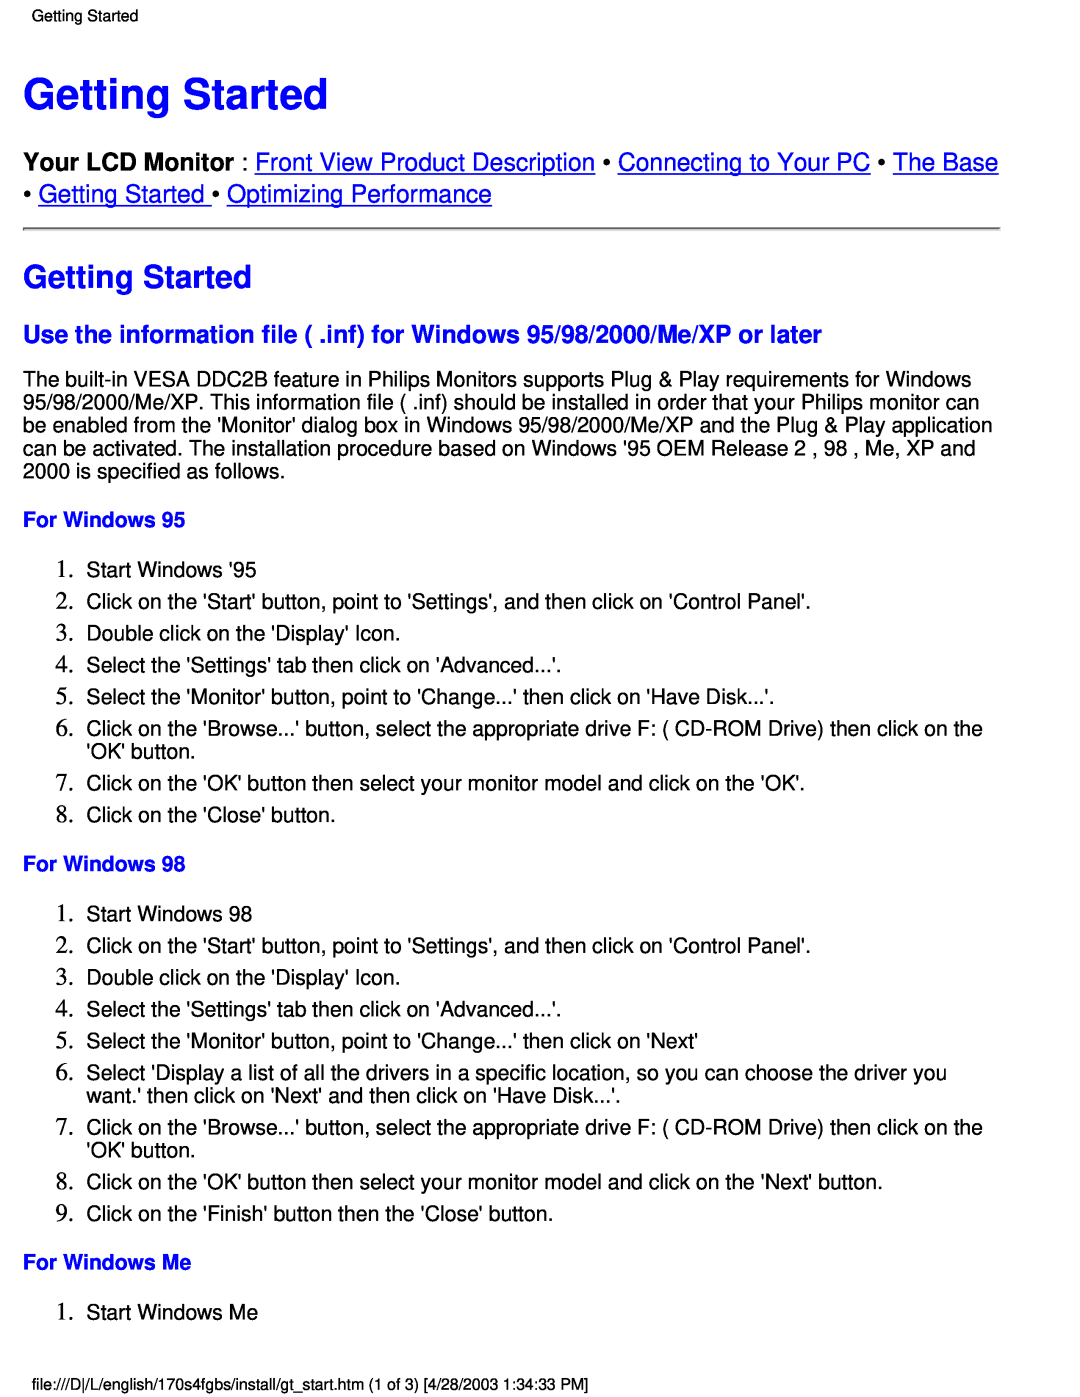 Philips 170S4FS, 170S4FG user manual Getting Started Optimizing Performance, For Windows Me 